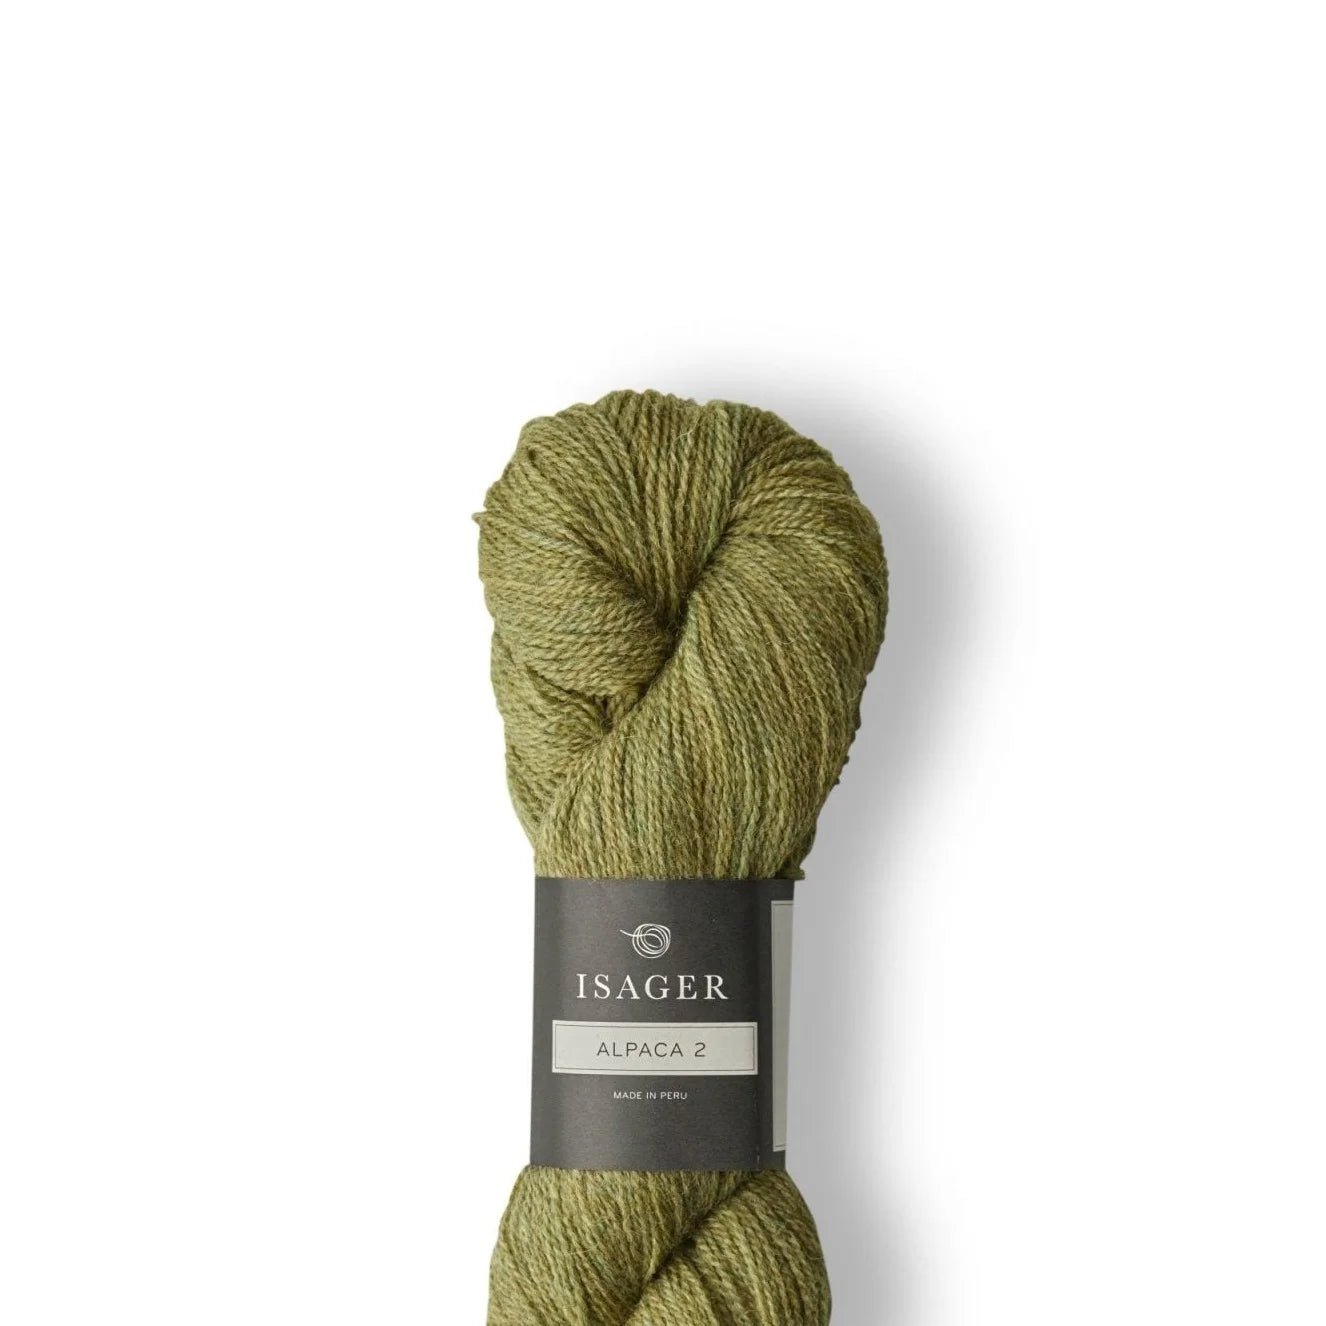 Isager Alpaca 2 - Thyme - 4 Ply - Alpaca - The Little Yarn Store